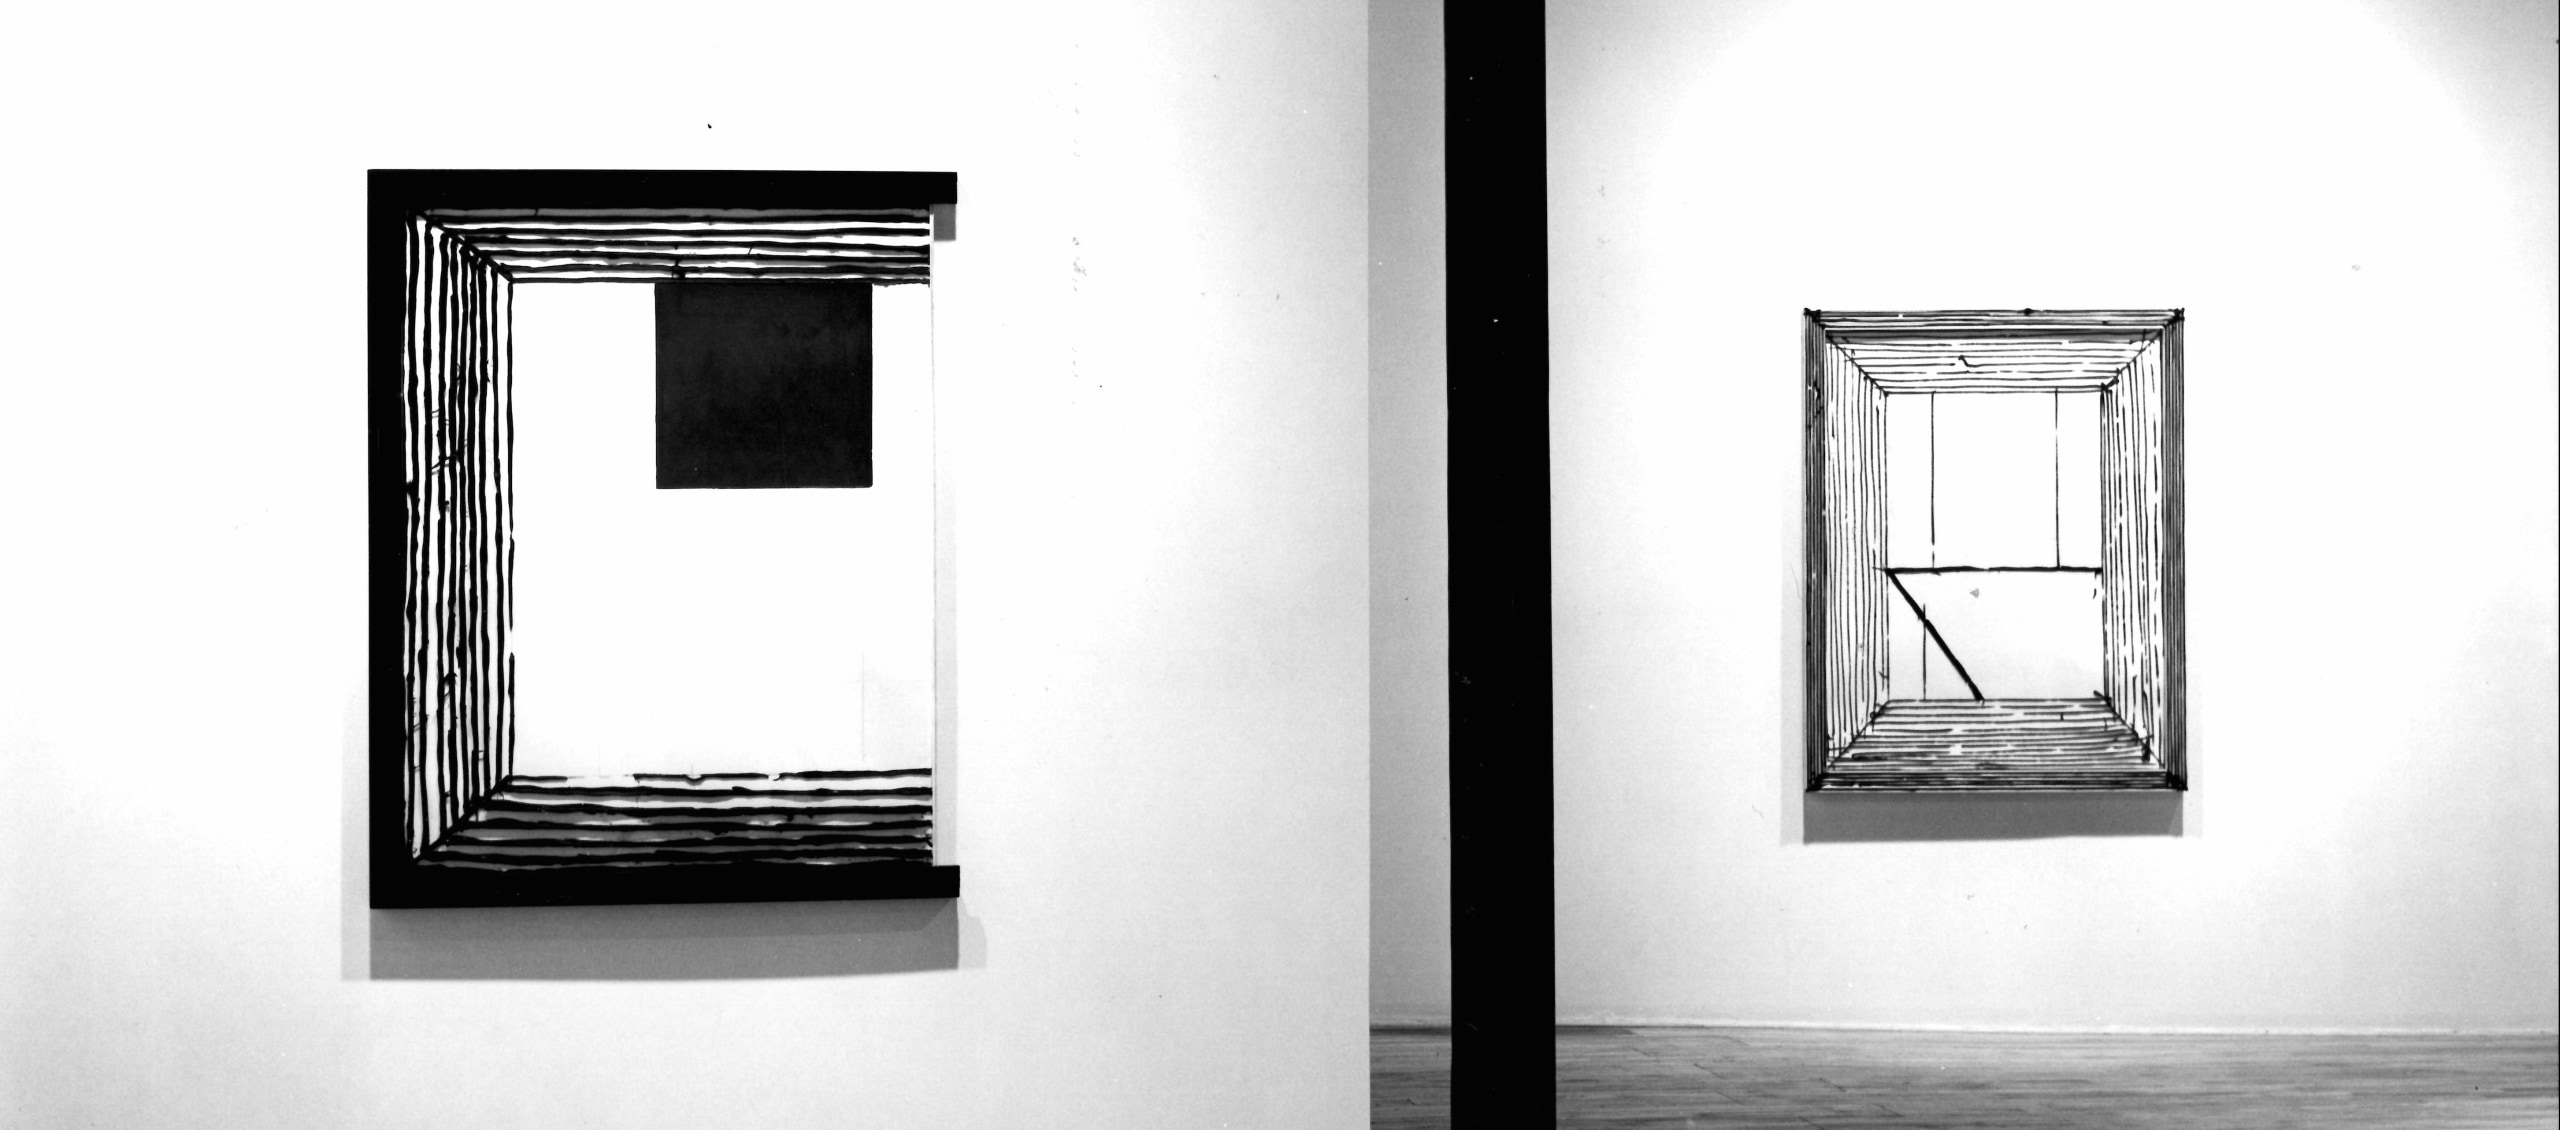 Installation view at Young Hoffman Gallery, Donald Sultan, New Paintings, 1979